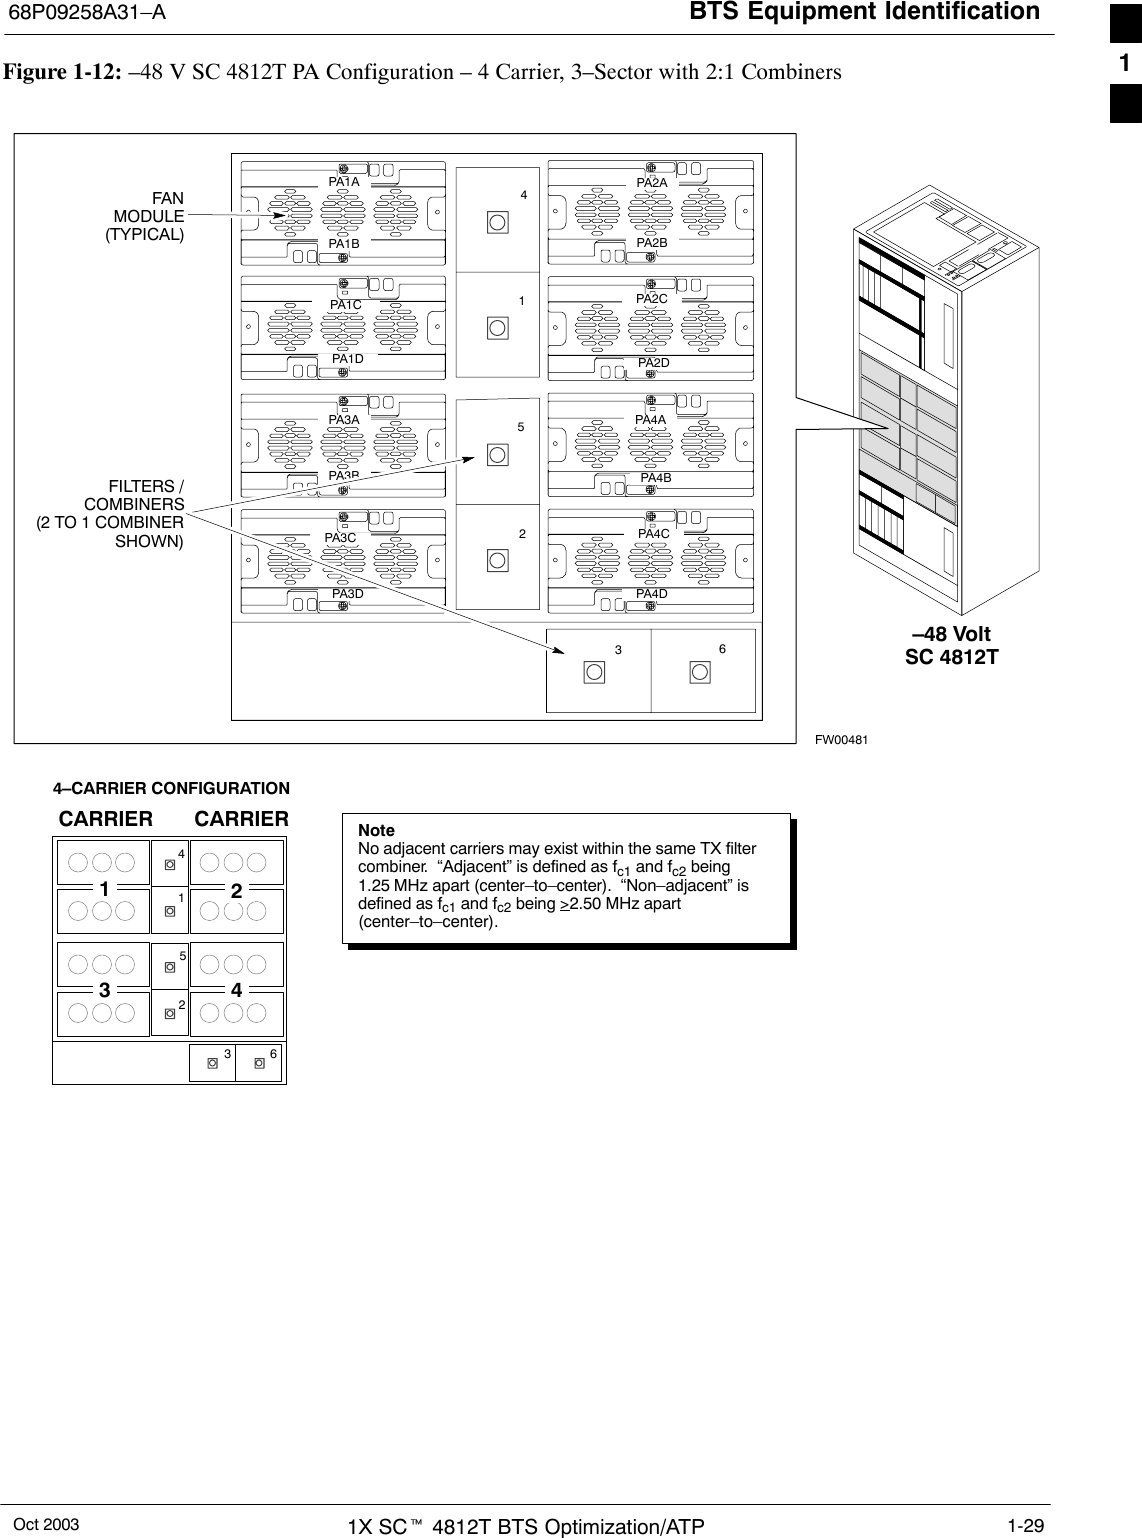 BTS Equipment Identification68P09258A31–AOct 2003 1X SCt 4812T BTS Optimization/ATP 1-29Figure 1-12: –48 V SC 4812T PA Configuration – 4 Carrier, 3–Sector with 2:1 CombinersPA1APA1BNoteNo adjacent carriers may exist within the same TX filtercombiner.  “Adjacent” is defined as fc1 and fc2 being1.25 MHz apart (center–to–center).  “Non–adjacent” isdefined as fc1 and fc2 being &gt;2.50 MHz apart(center–to–center).4–CARRIER CONFIGURATIONCARRIER CARRIERPA1CPA1DPA3CPA3DPA2APA2BPA2CPA2DPA4CPA4DFW00481123456123 4123456PA3APA3BPA4APA4BFANMODULE(TYPICAL)FILTERS /COMBINERS(2 TO 1 COMBINERSHOWN)–48 VoltSC 4812T1